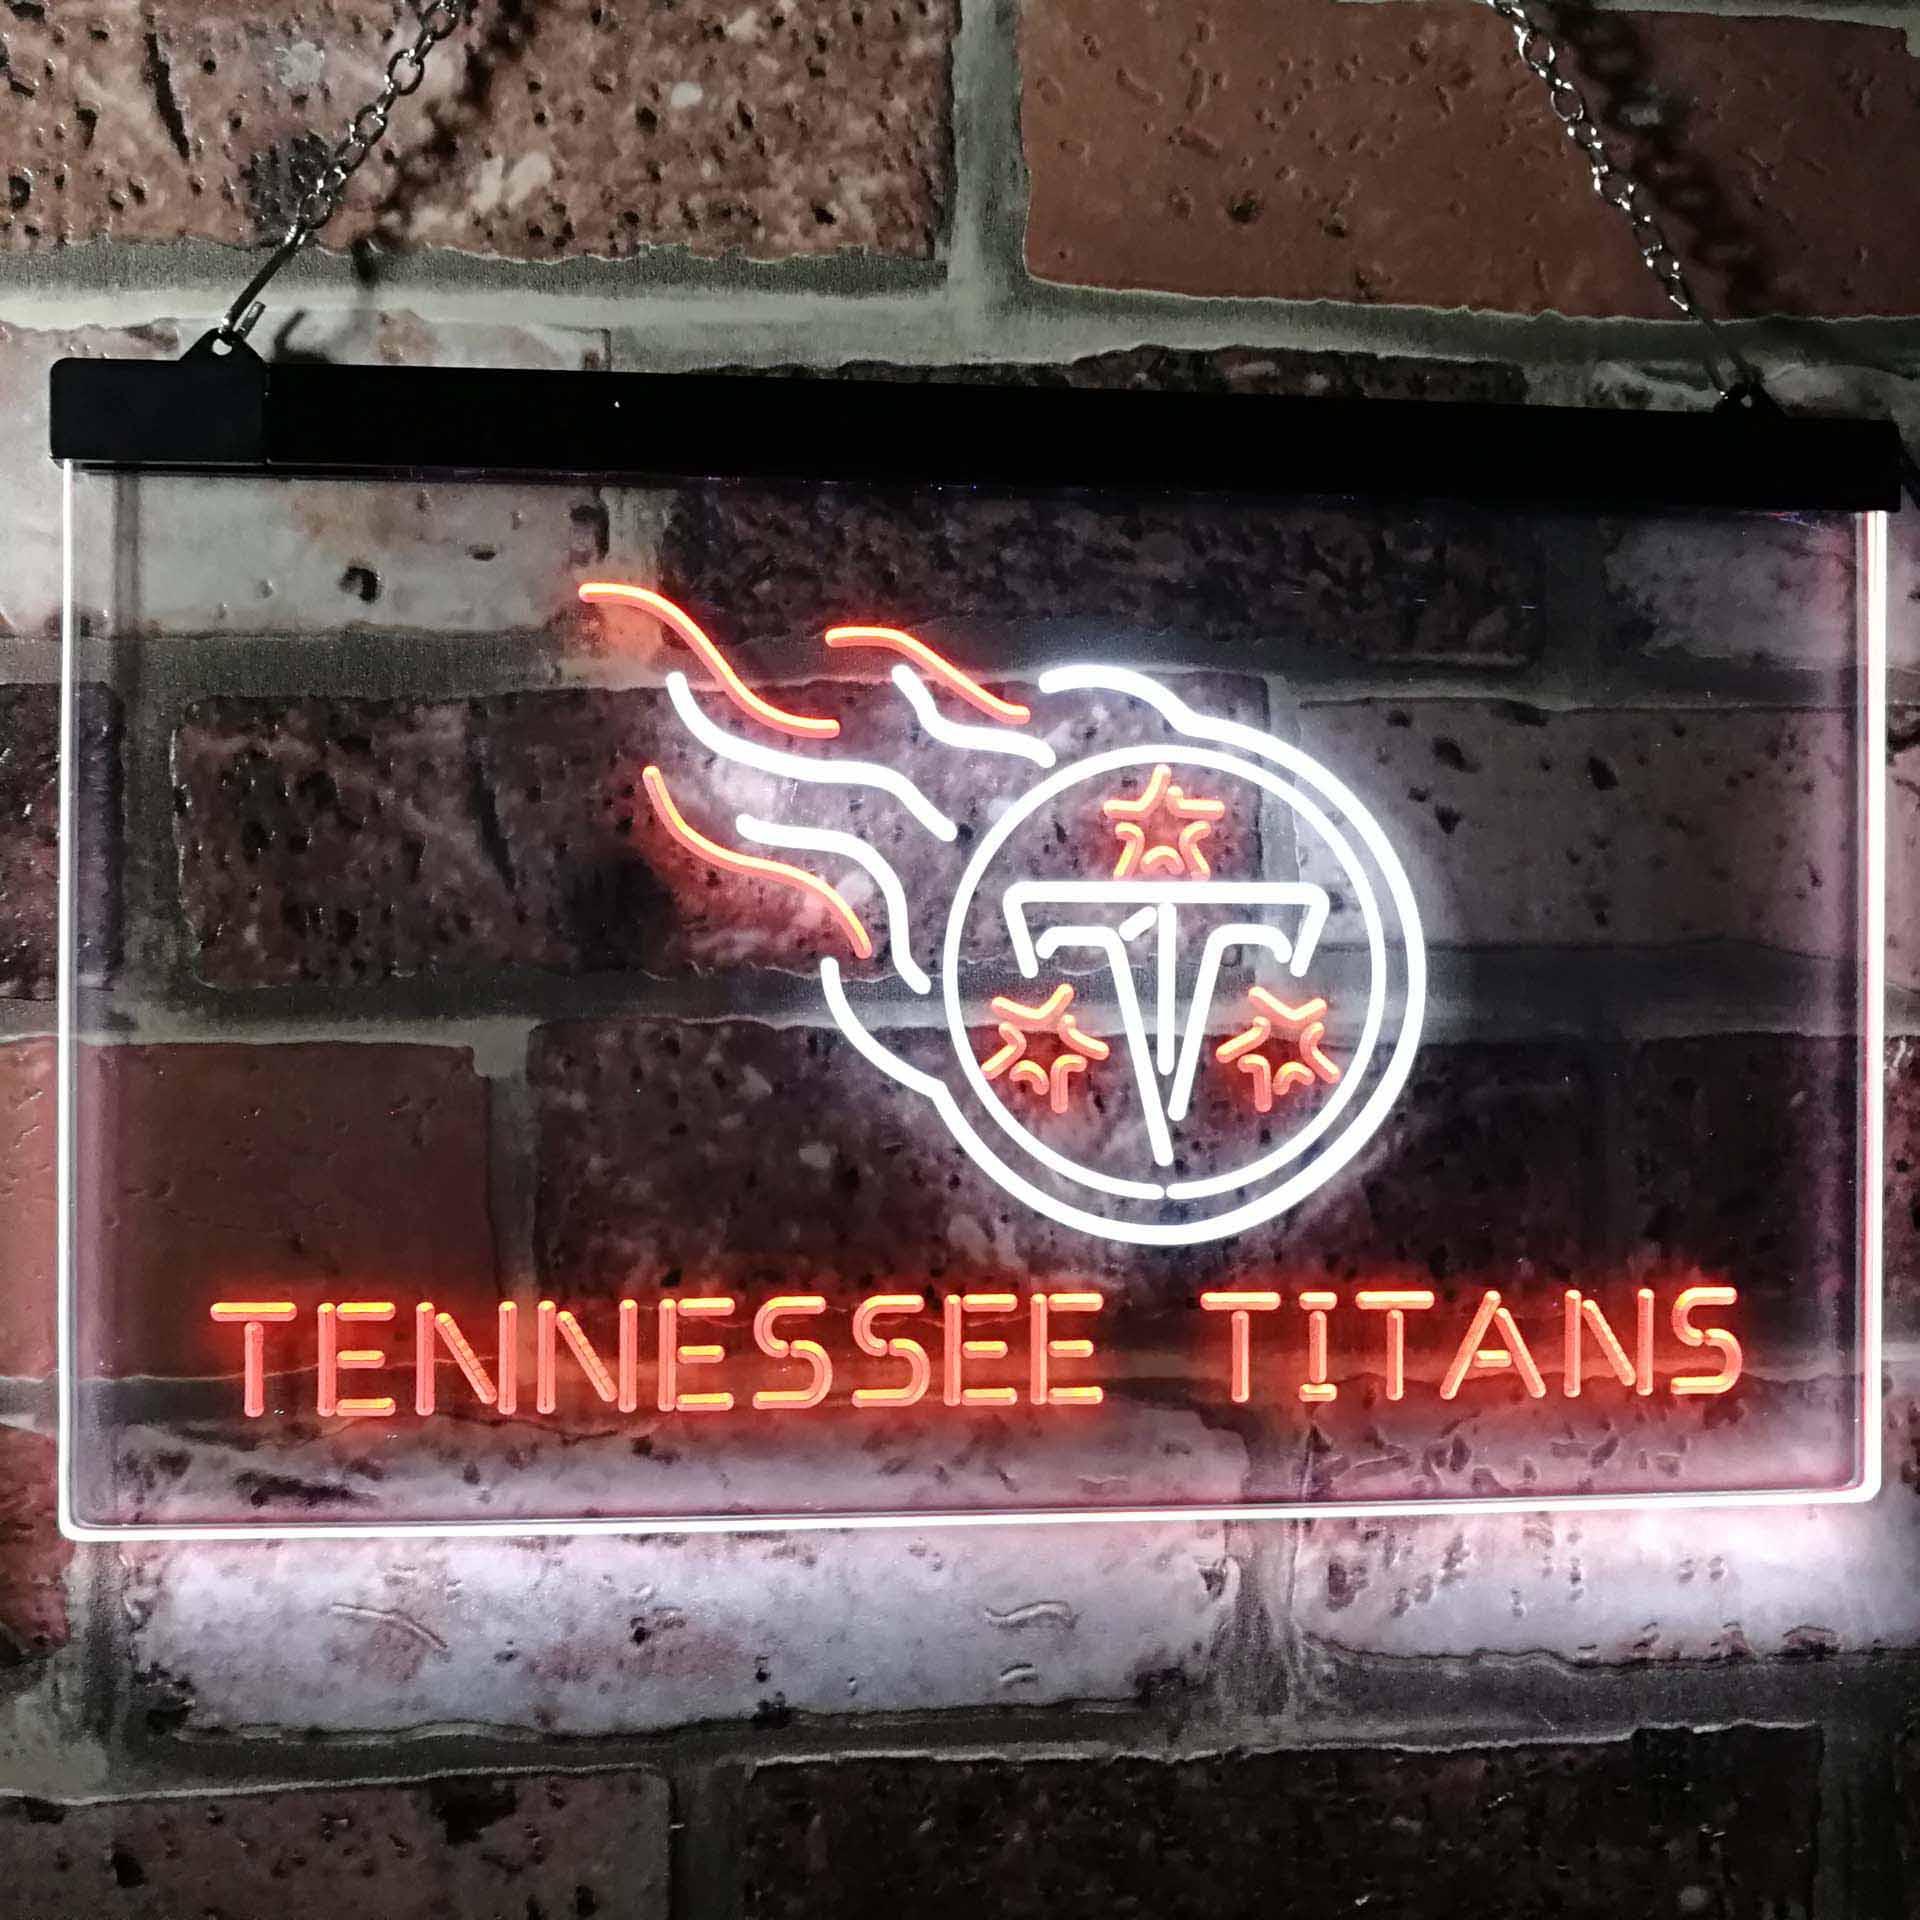 Tennessee Titansation LED Neon Sign